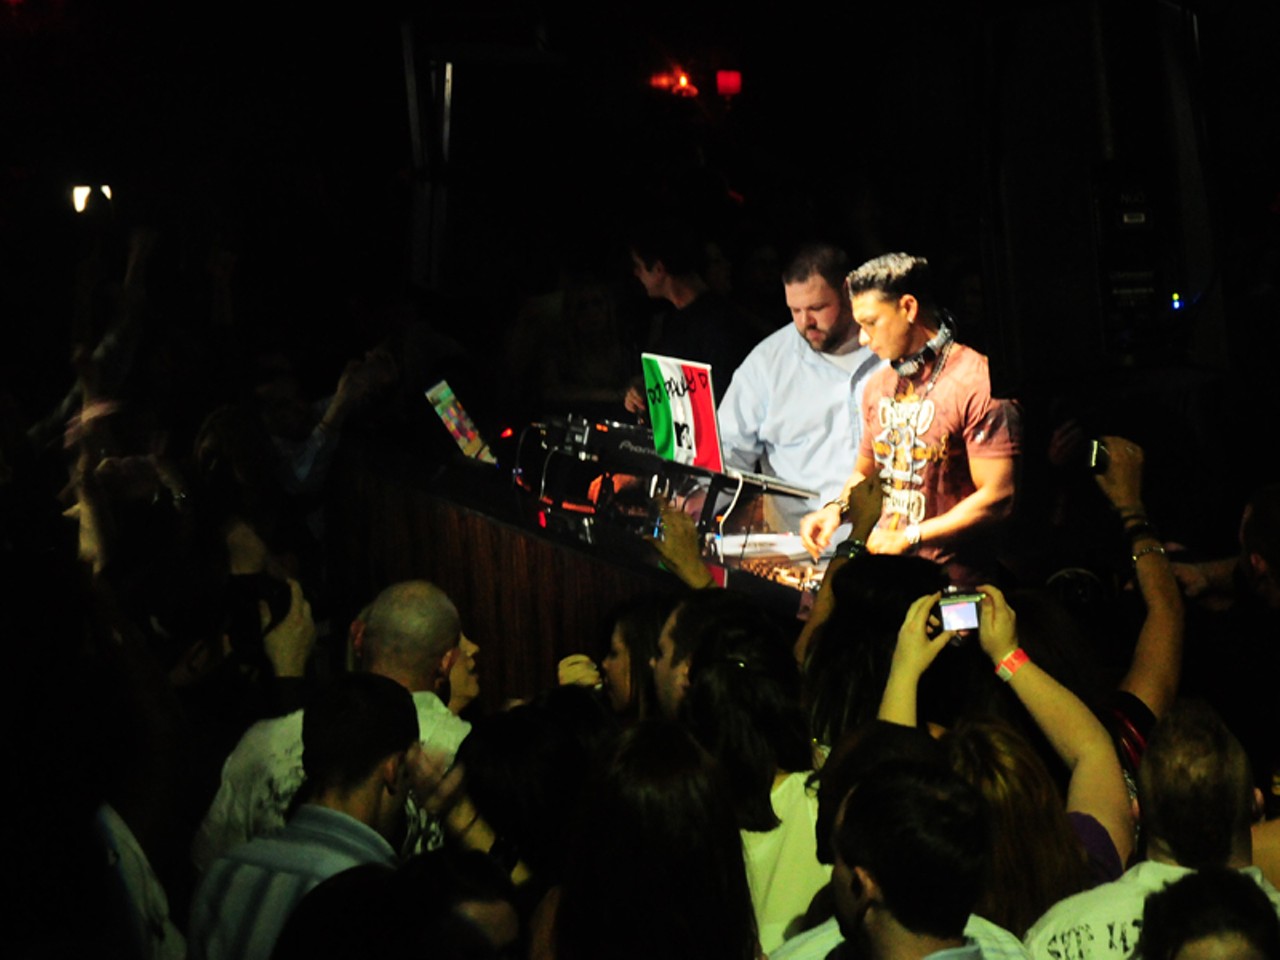 Pauly D of Jersey Shore at Home Nightclub